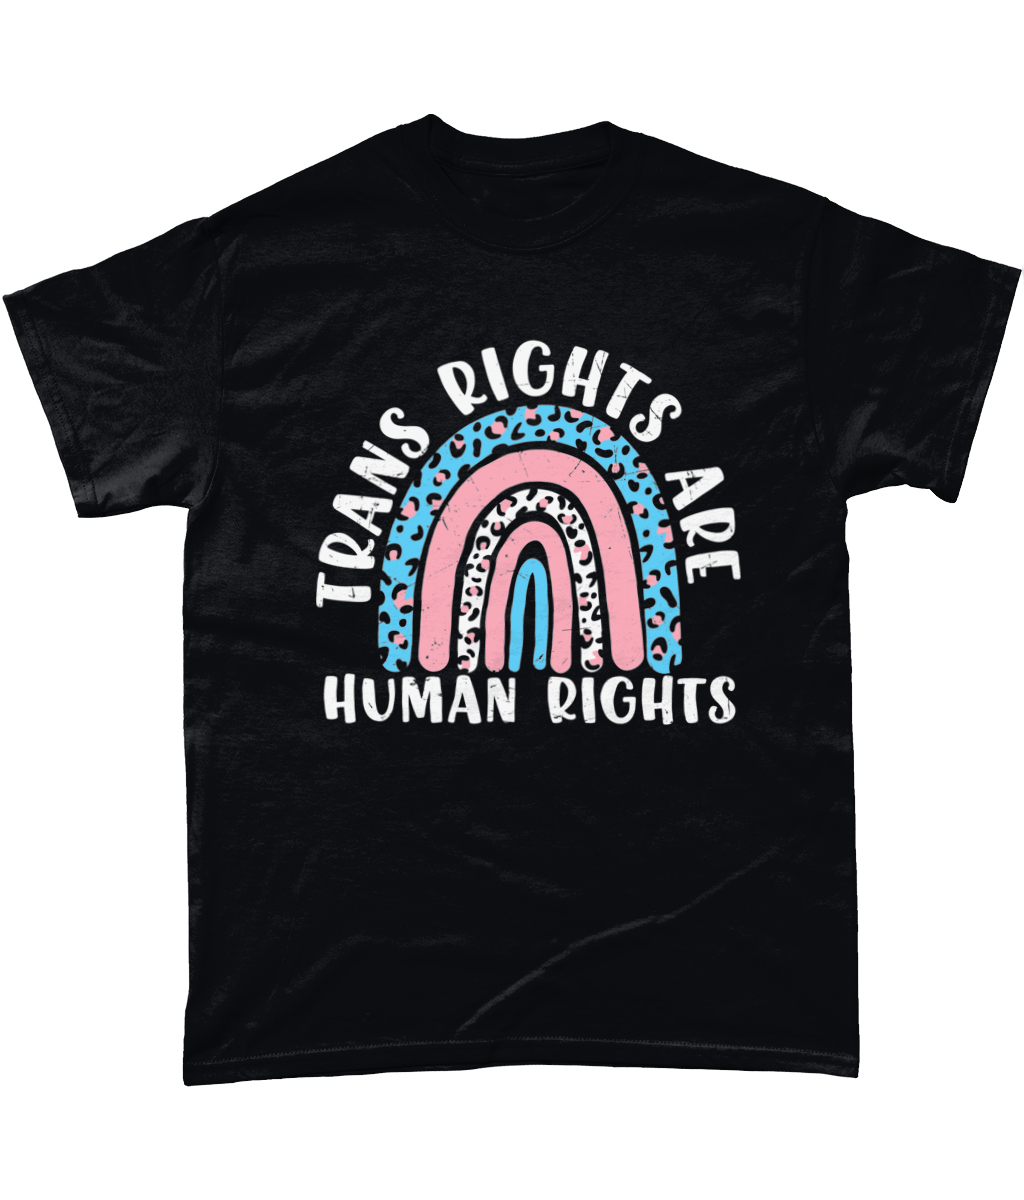 Trans rights are human rights t-shirt